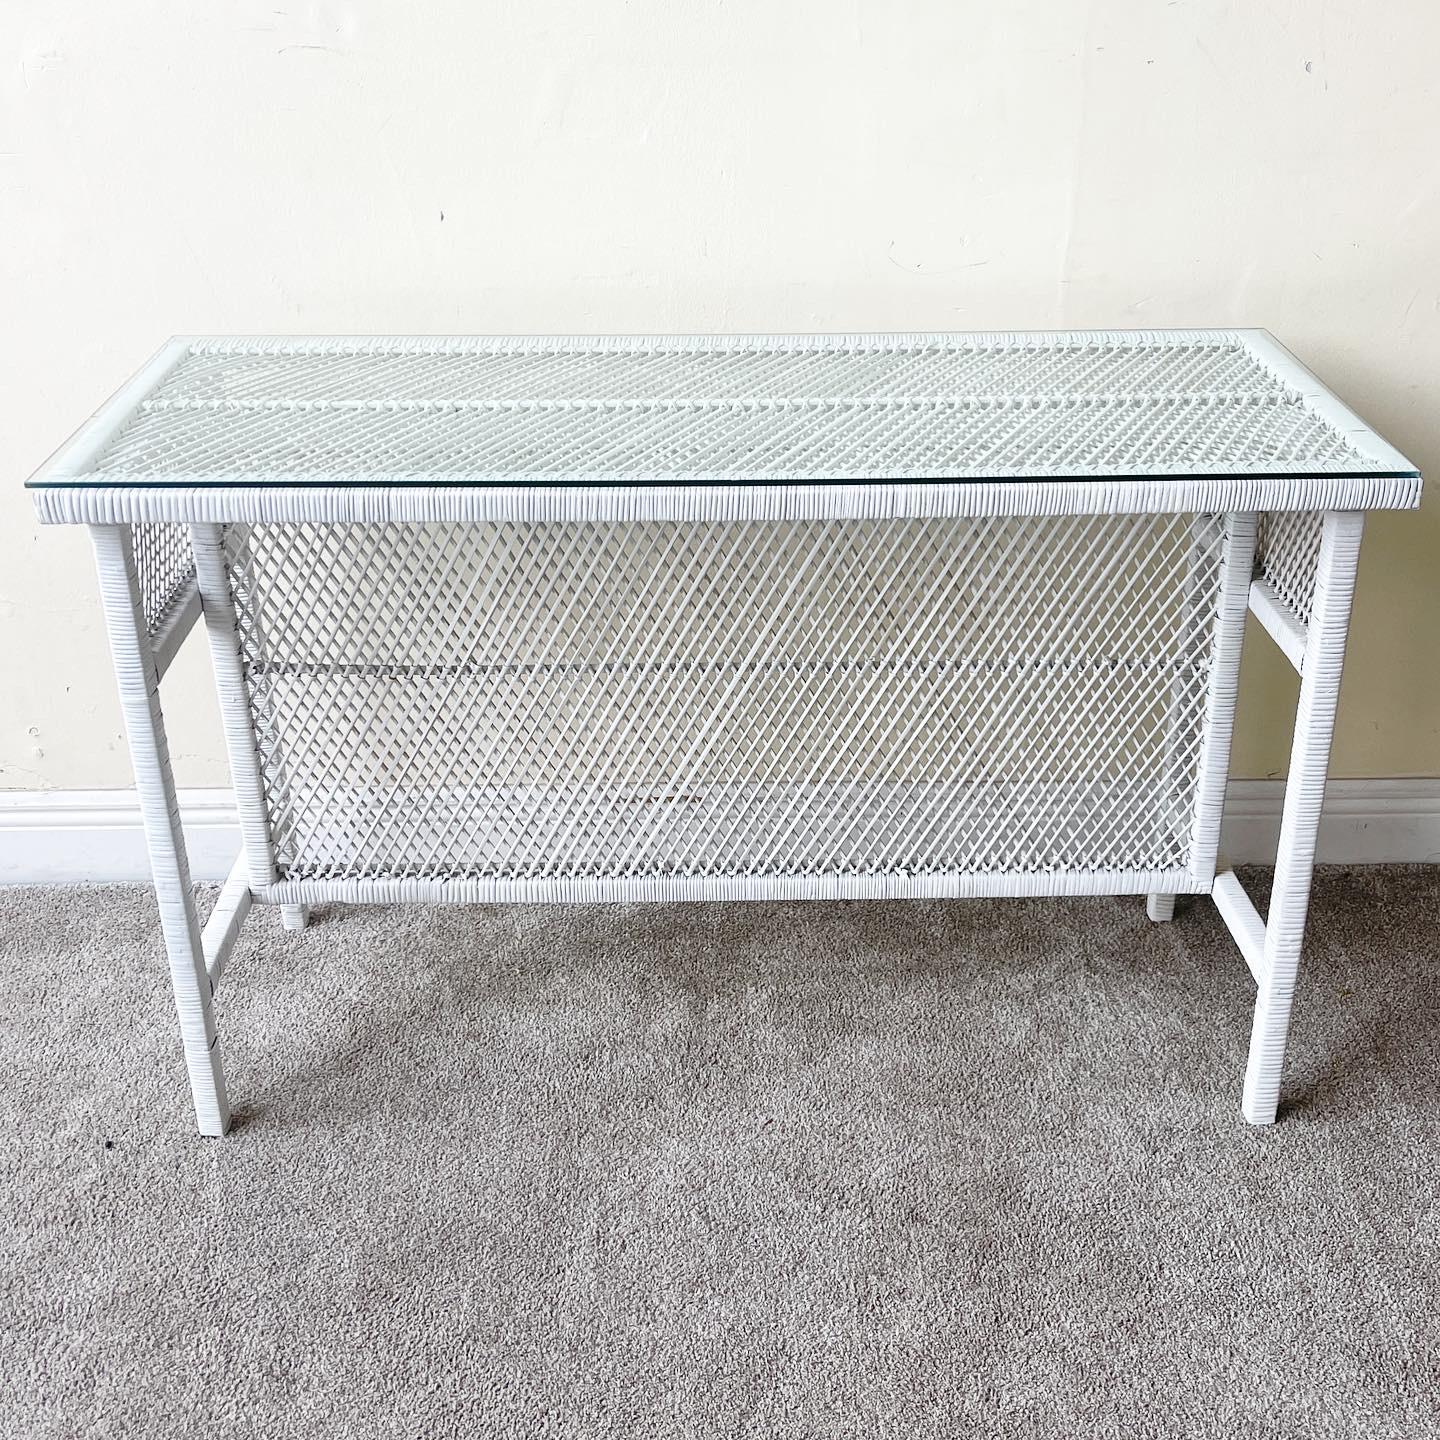 Boho Chic White Rattan Console Table With Glass Top In Good Condition For Sale In Delray Beach, FL